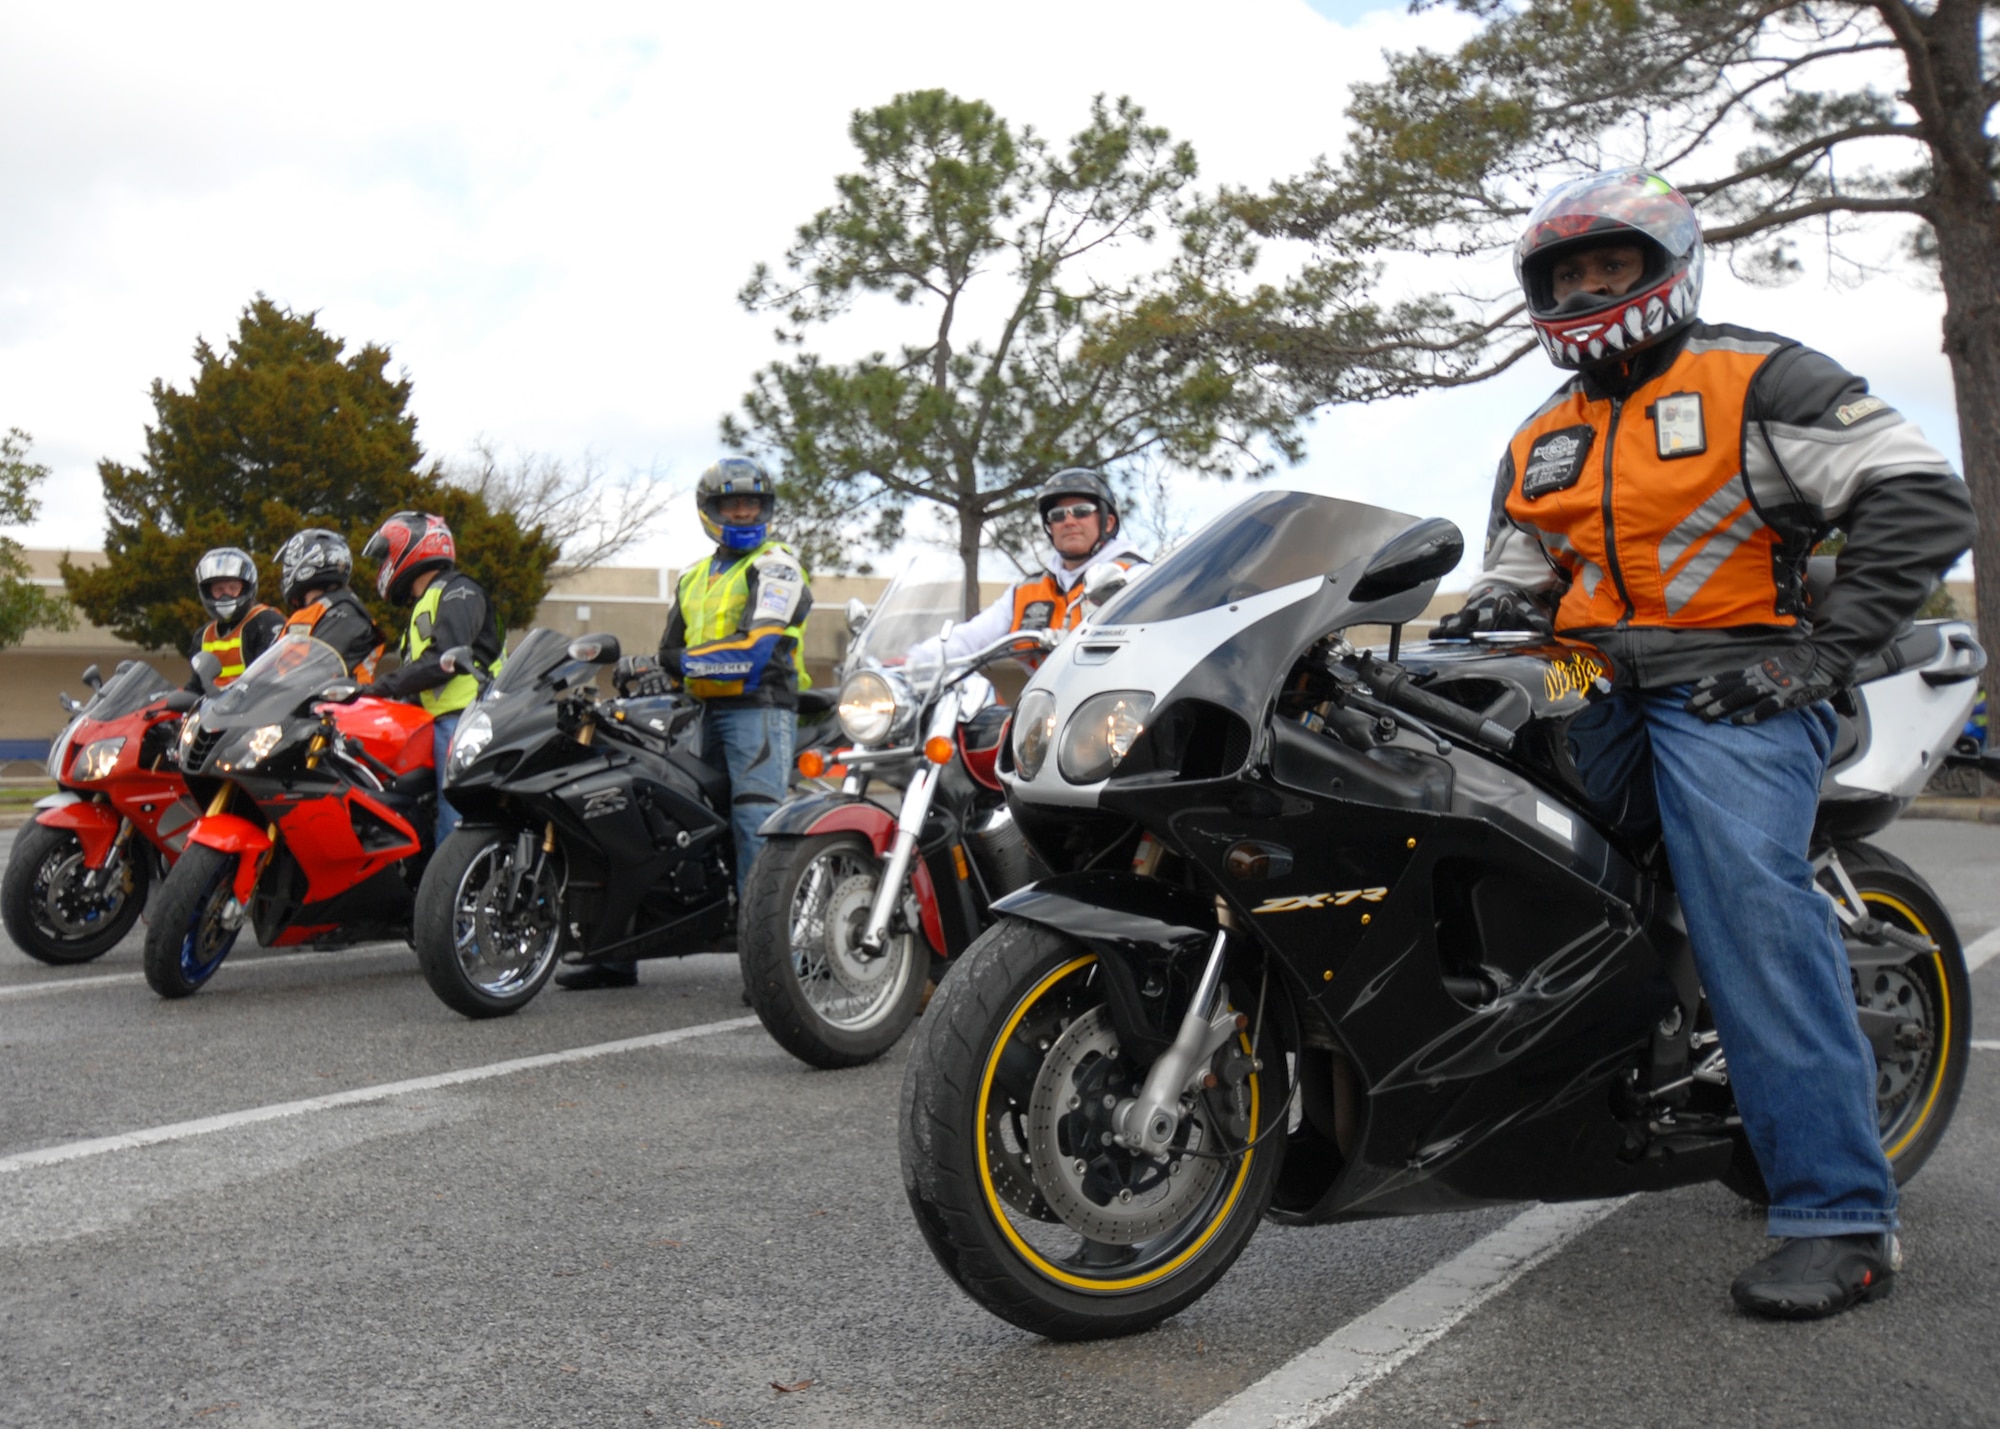 Riders mount up for the 60-mile group ride March 12 as part of Team Eglin's third annual Motorcycle Safety Day.  Despite threatening skies, the event brought out approximately 220 riders to participate in safety discussions, riding skills competition and group ride.  The safety day came at a critical time for Eglin with spring break approaching and a recent active-duty death involving a motorcycle.  (U.S. Air Force photo/Samuel King Jr.)